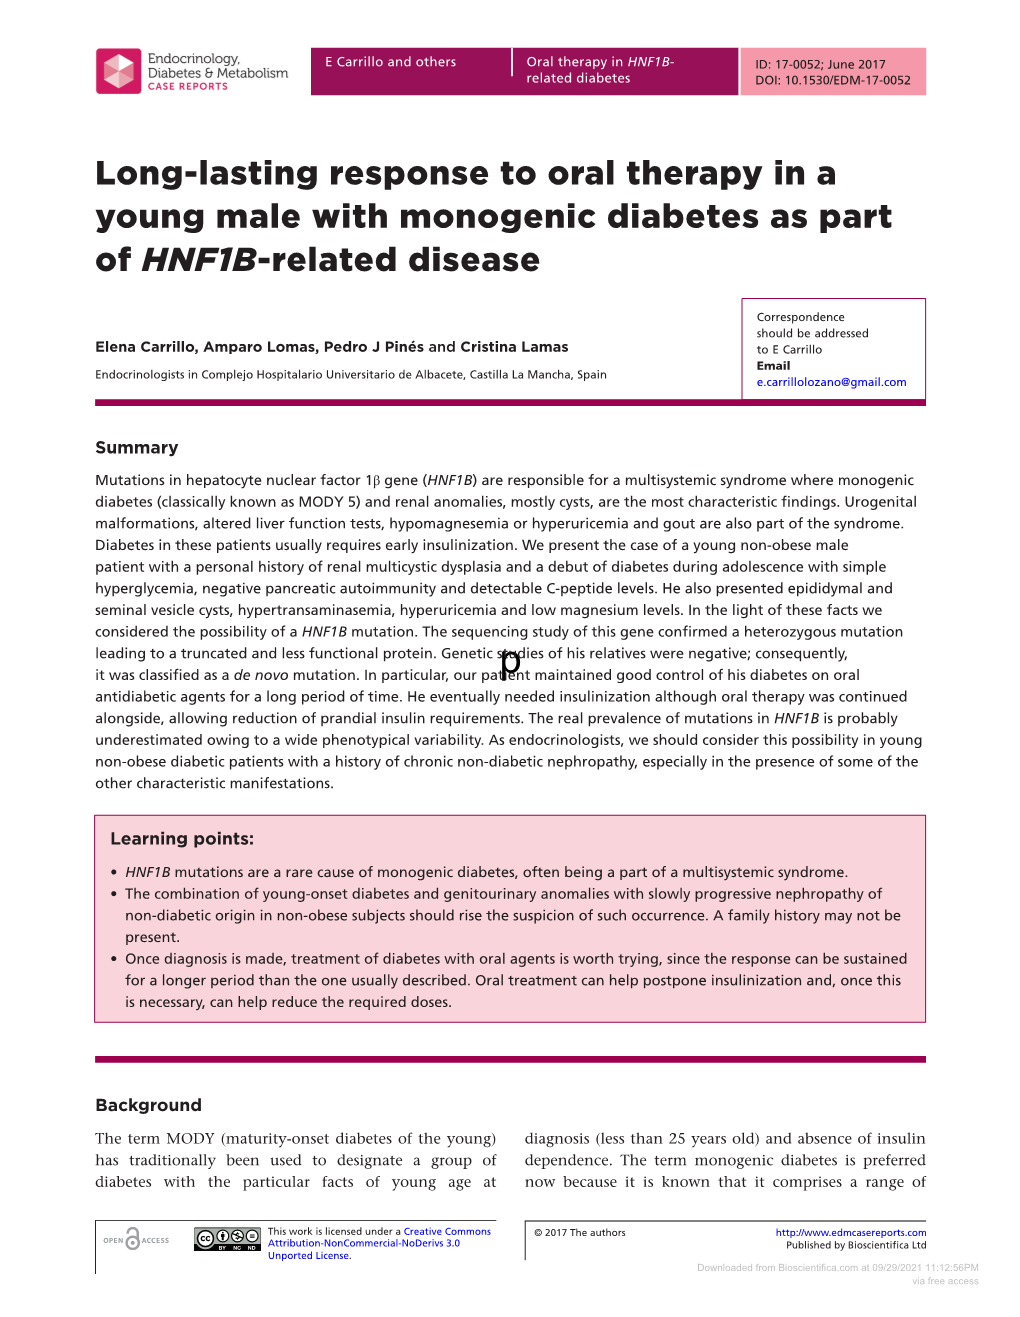 Long-Lasting Response to Oral Therapy in a Young Male with Monogenic Diabetes As Part of HNF1B-Related Disease